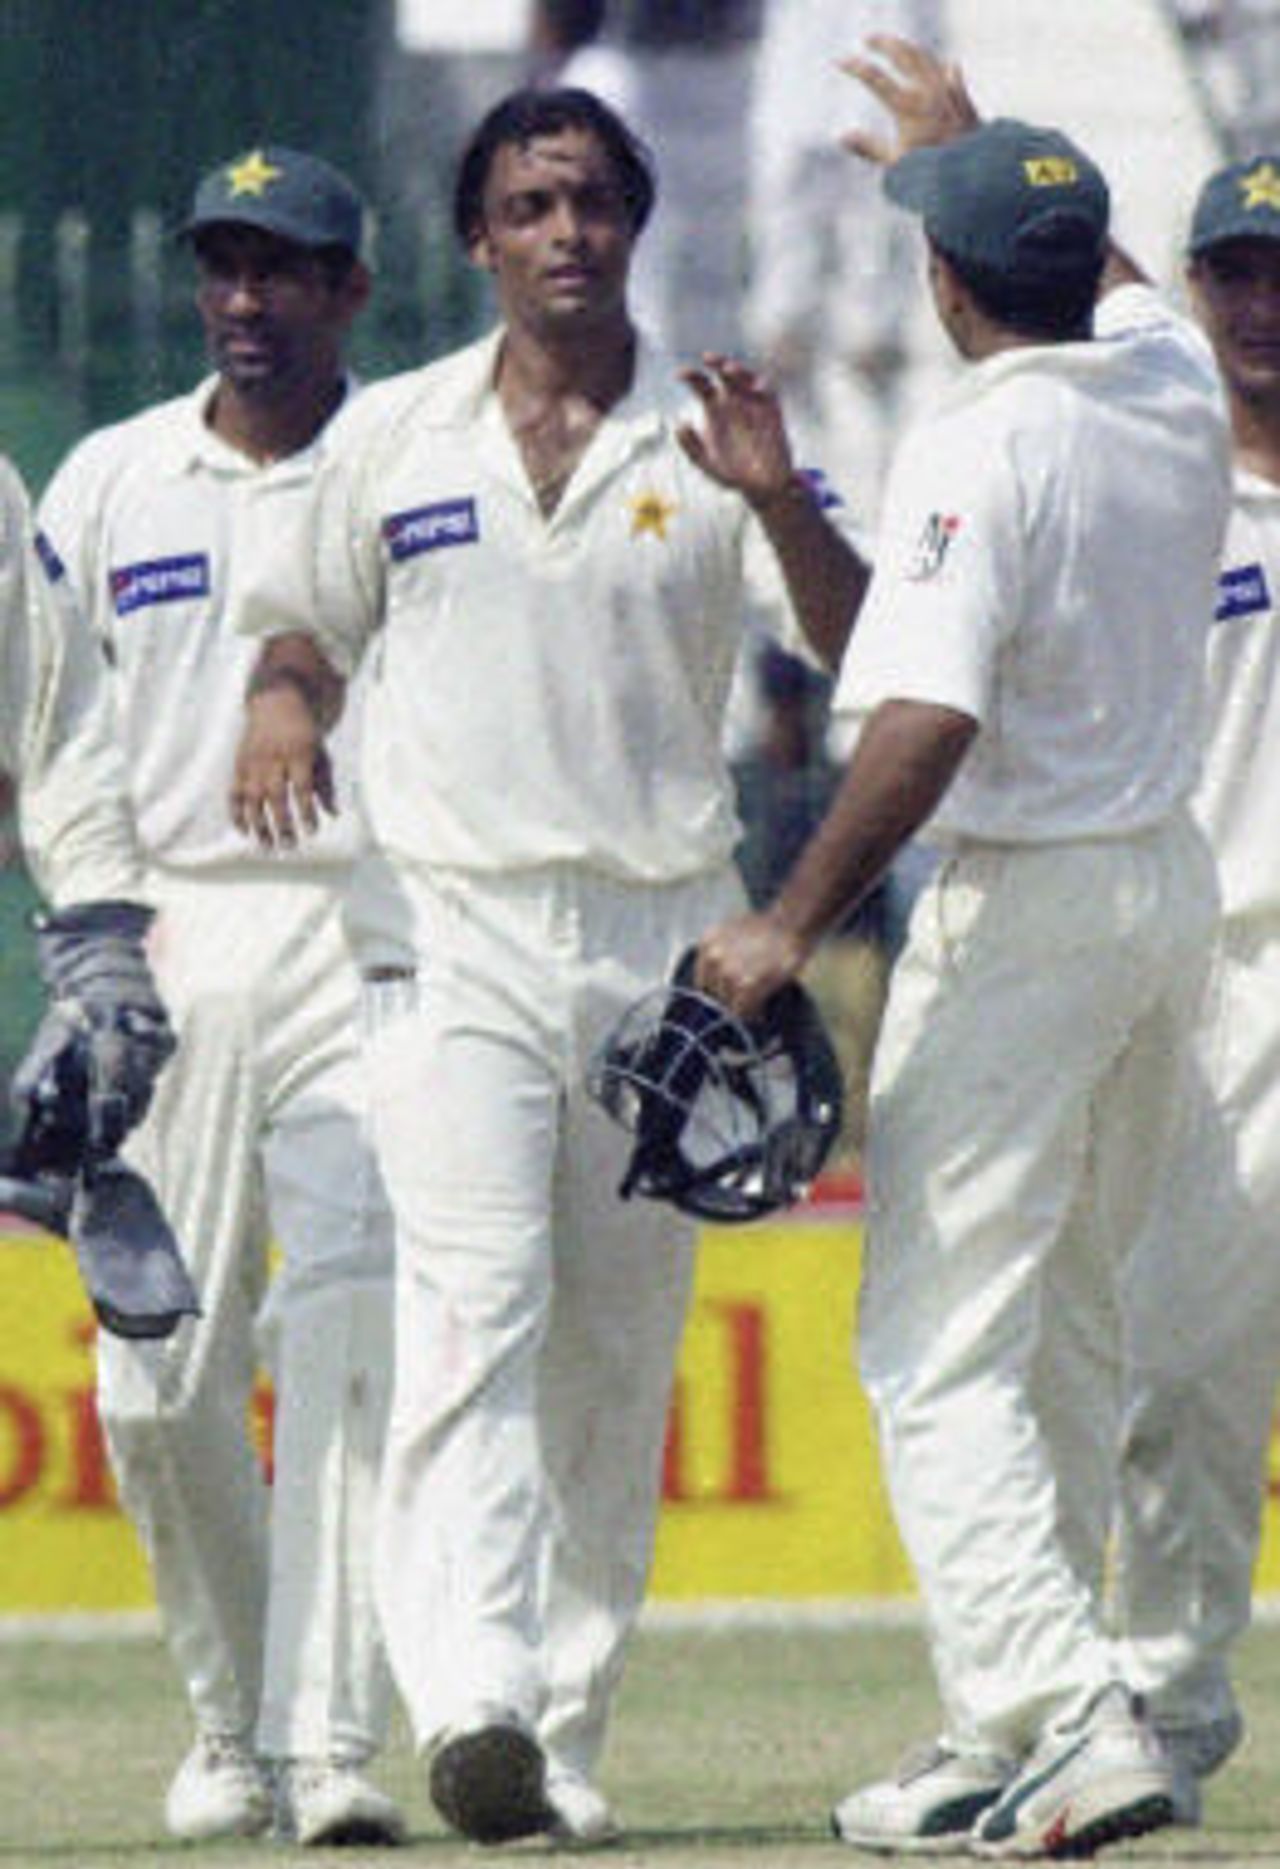 Shoaib Akhtar (C) celebrates his sixth wicket with his teammates on the second day of the second Test between Pakistan and Bangladesh in Peshawar, 28 August 2003